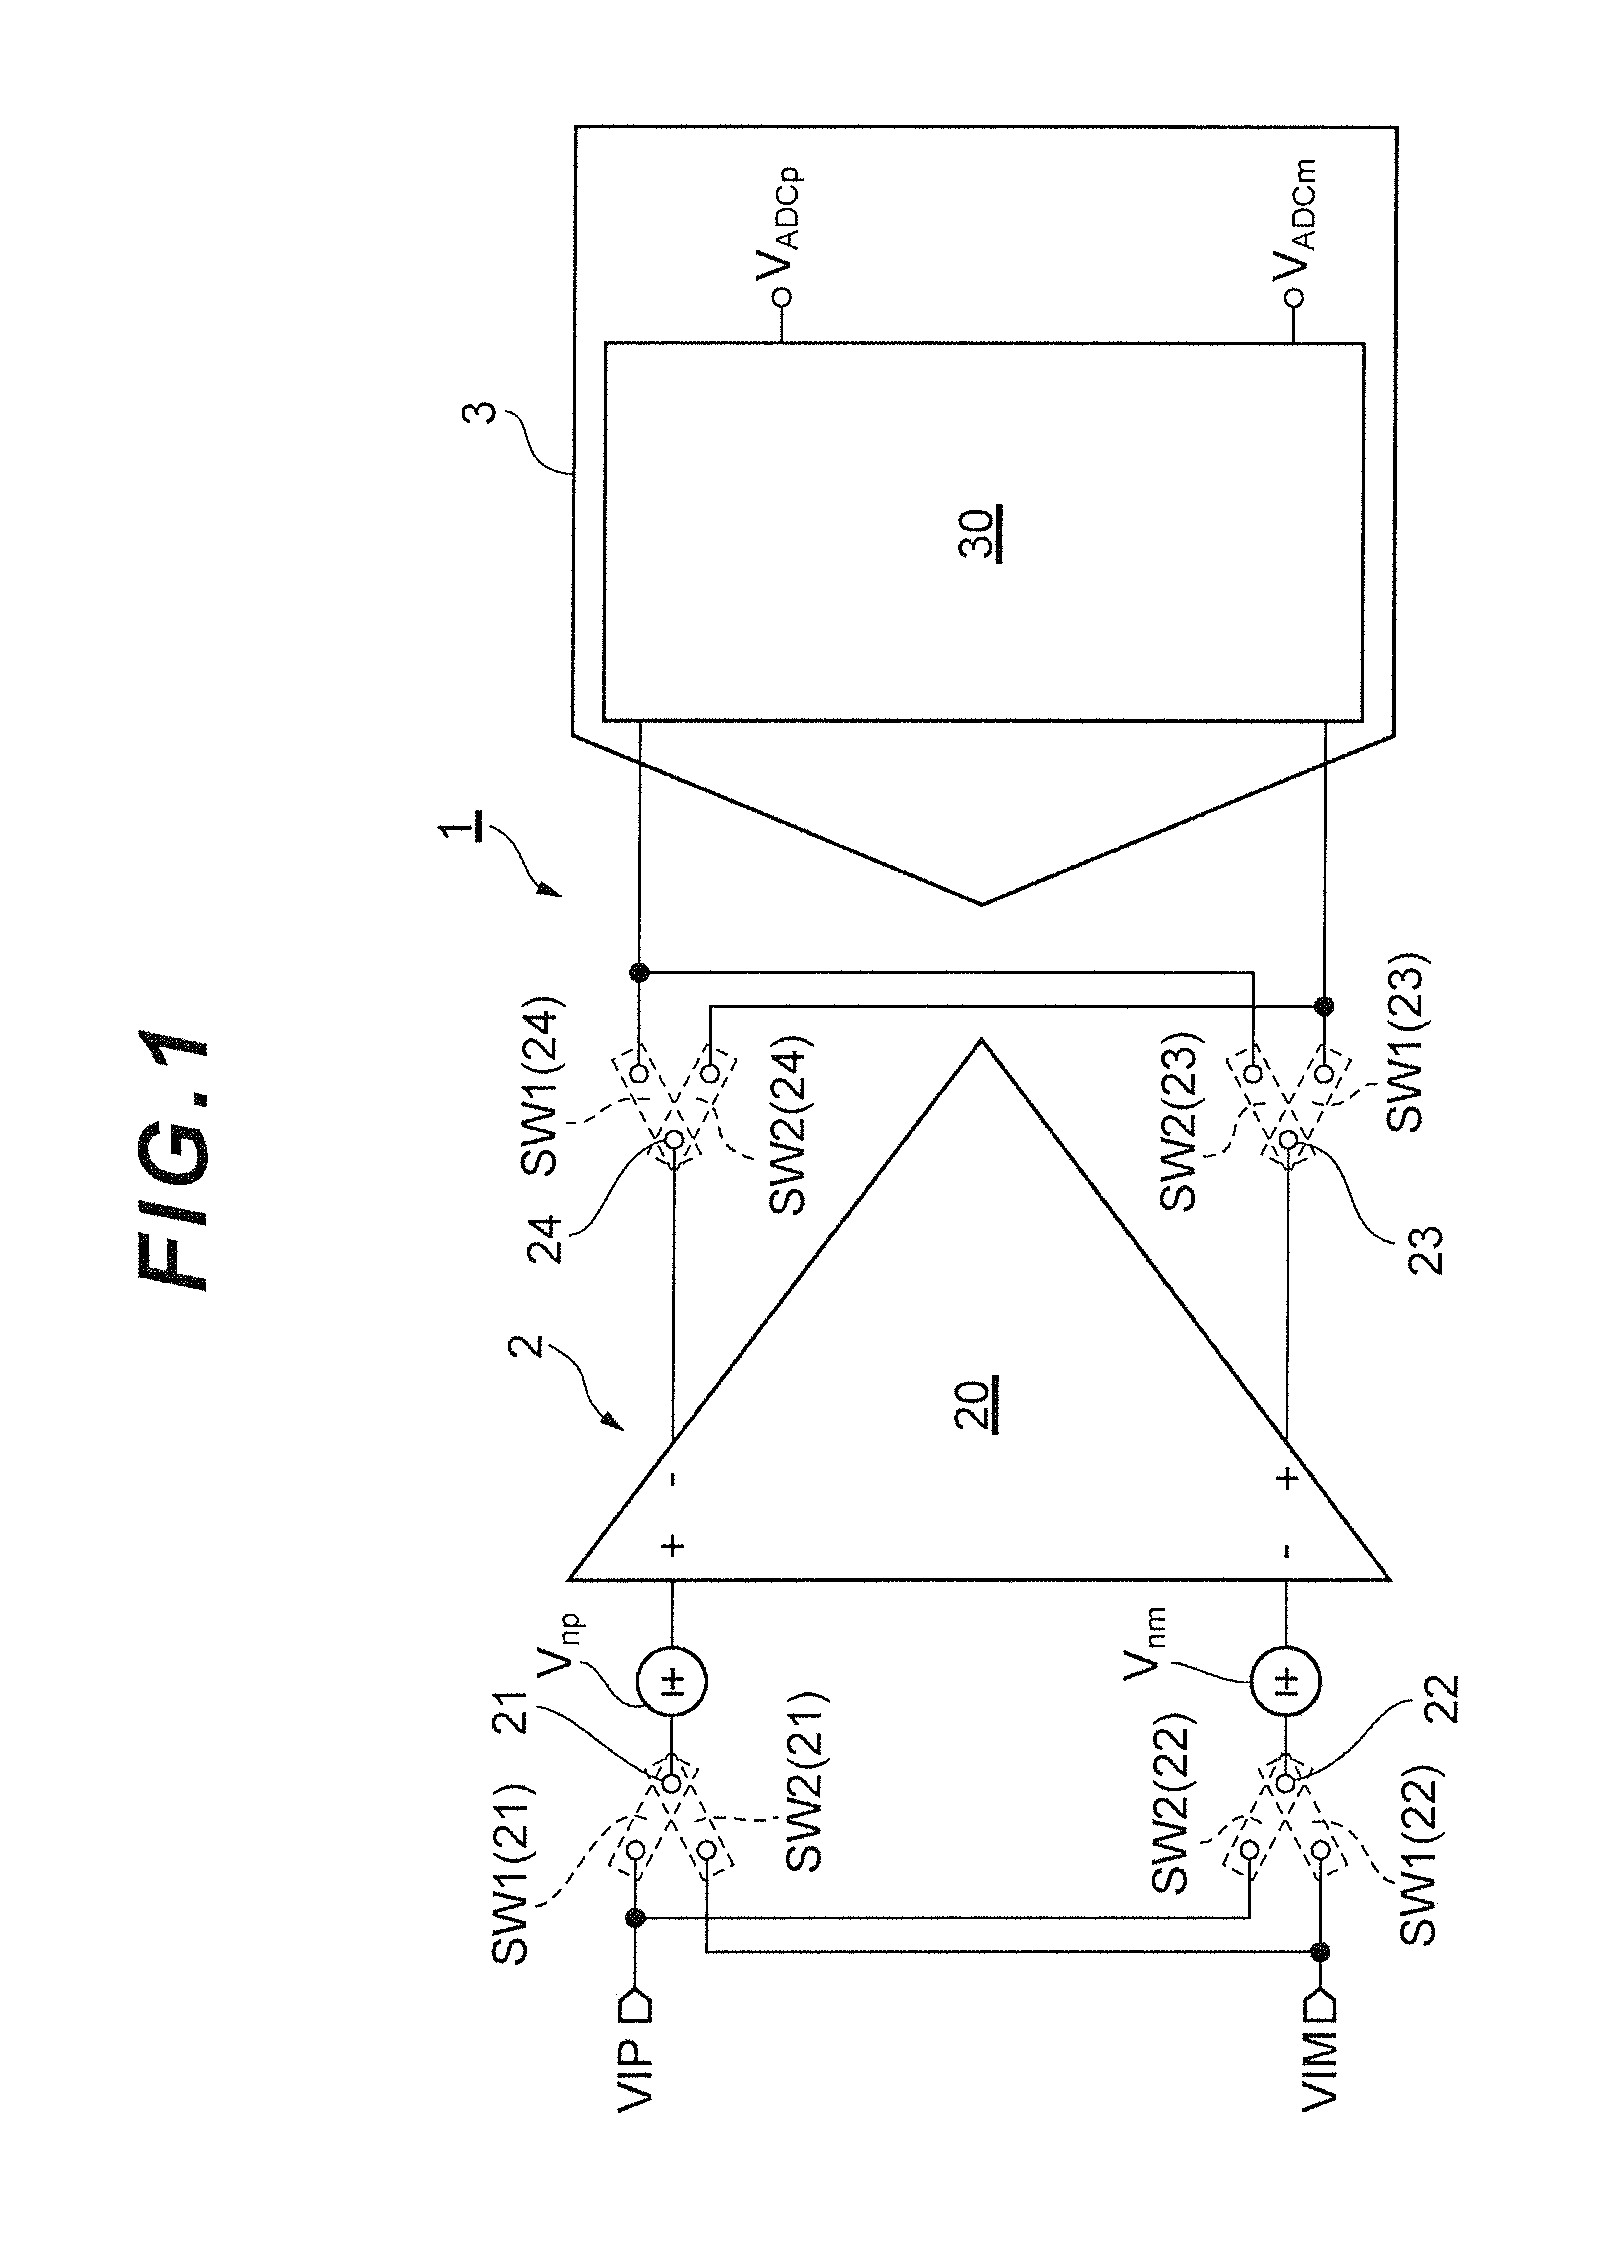 Analog-digital conversion system and method for controlling the same